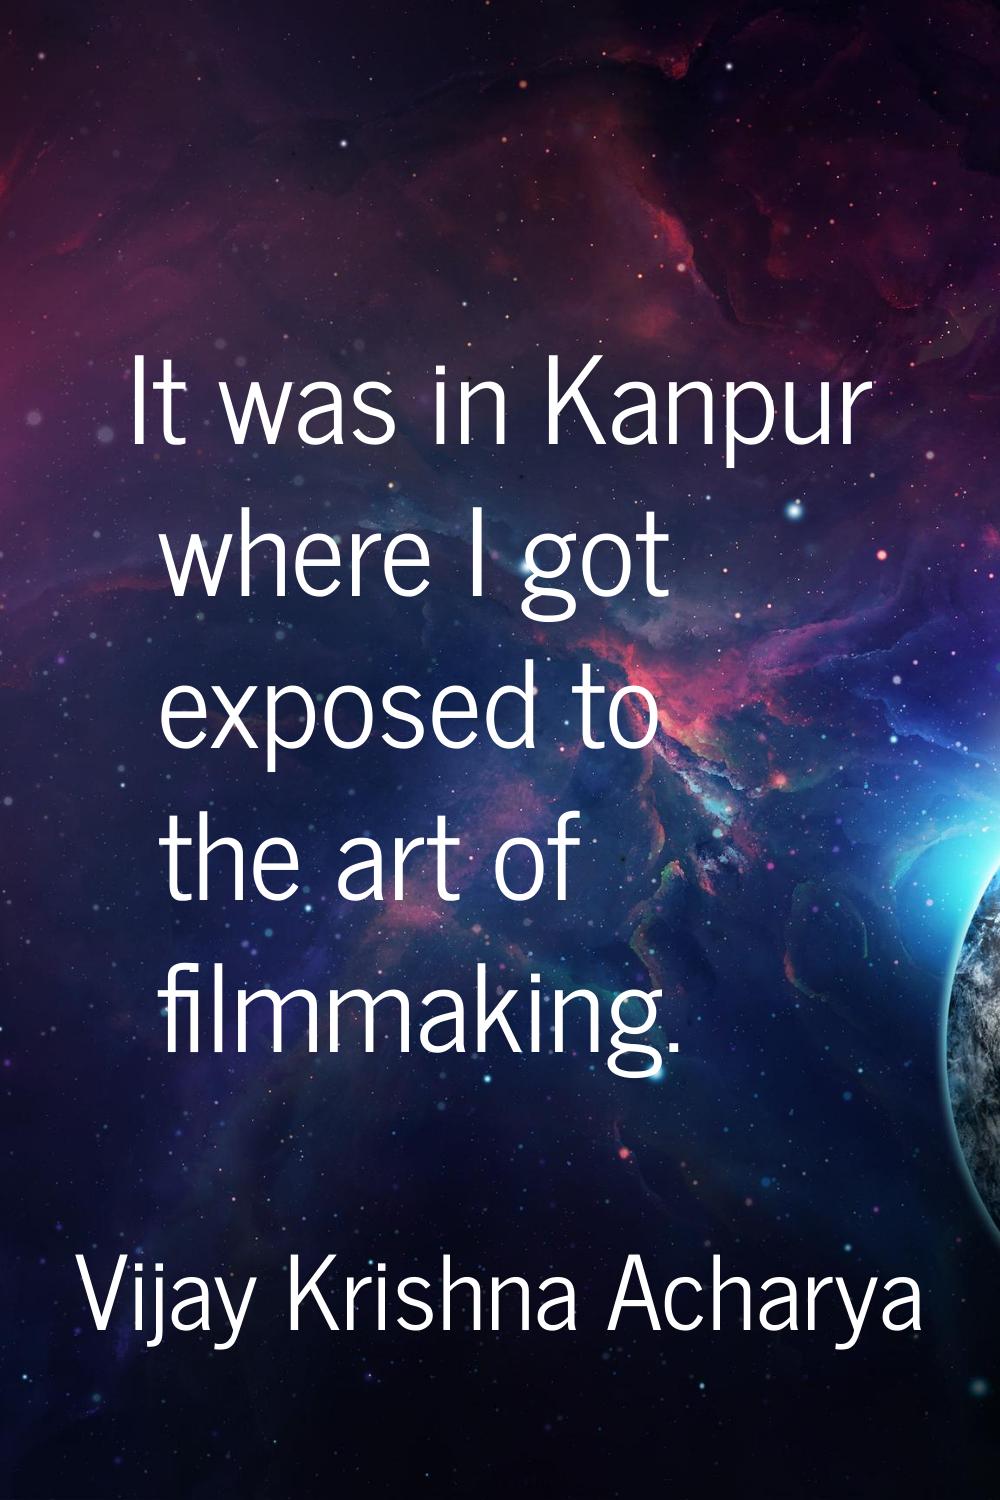 It was in Kanpur where I got exposed to the art of filmmaking.